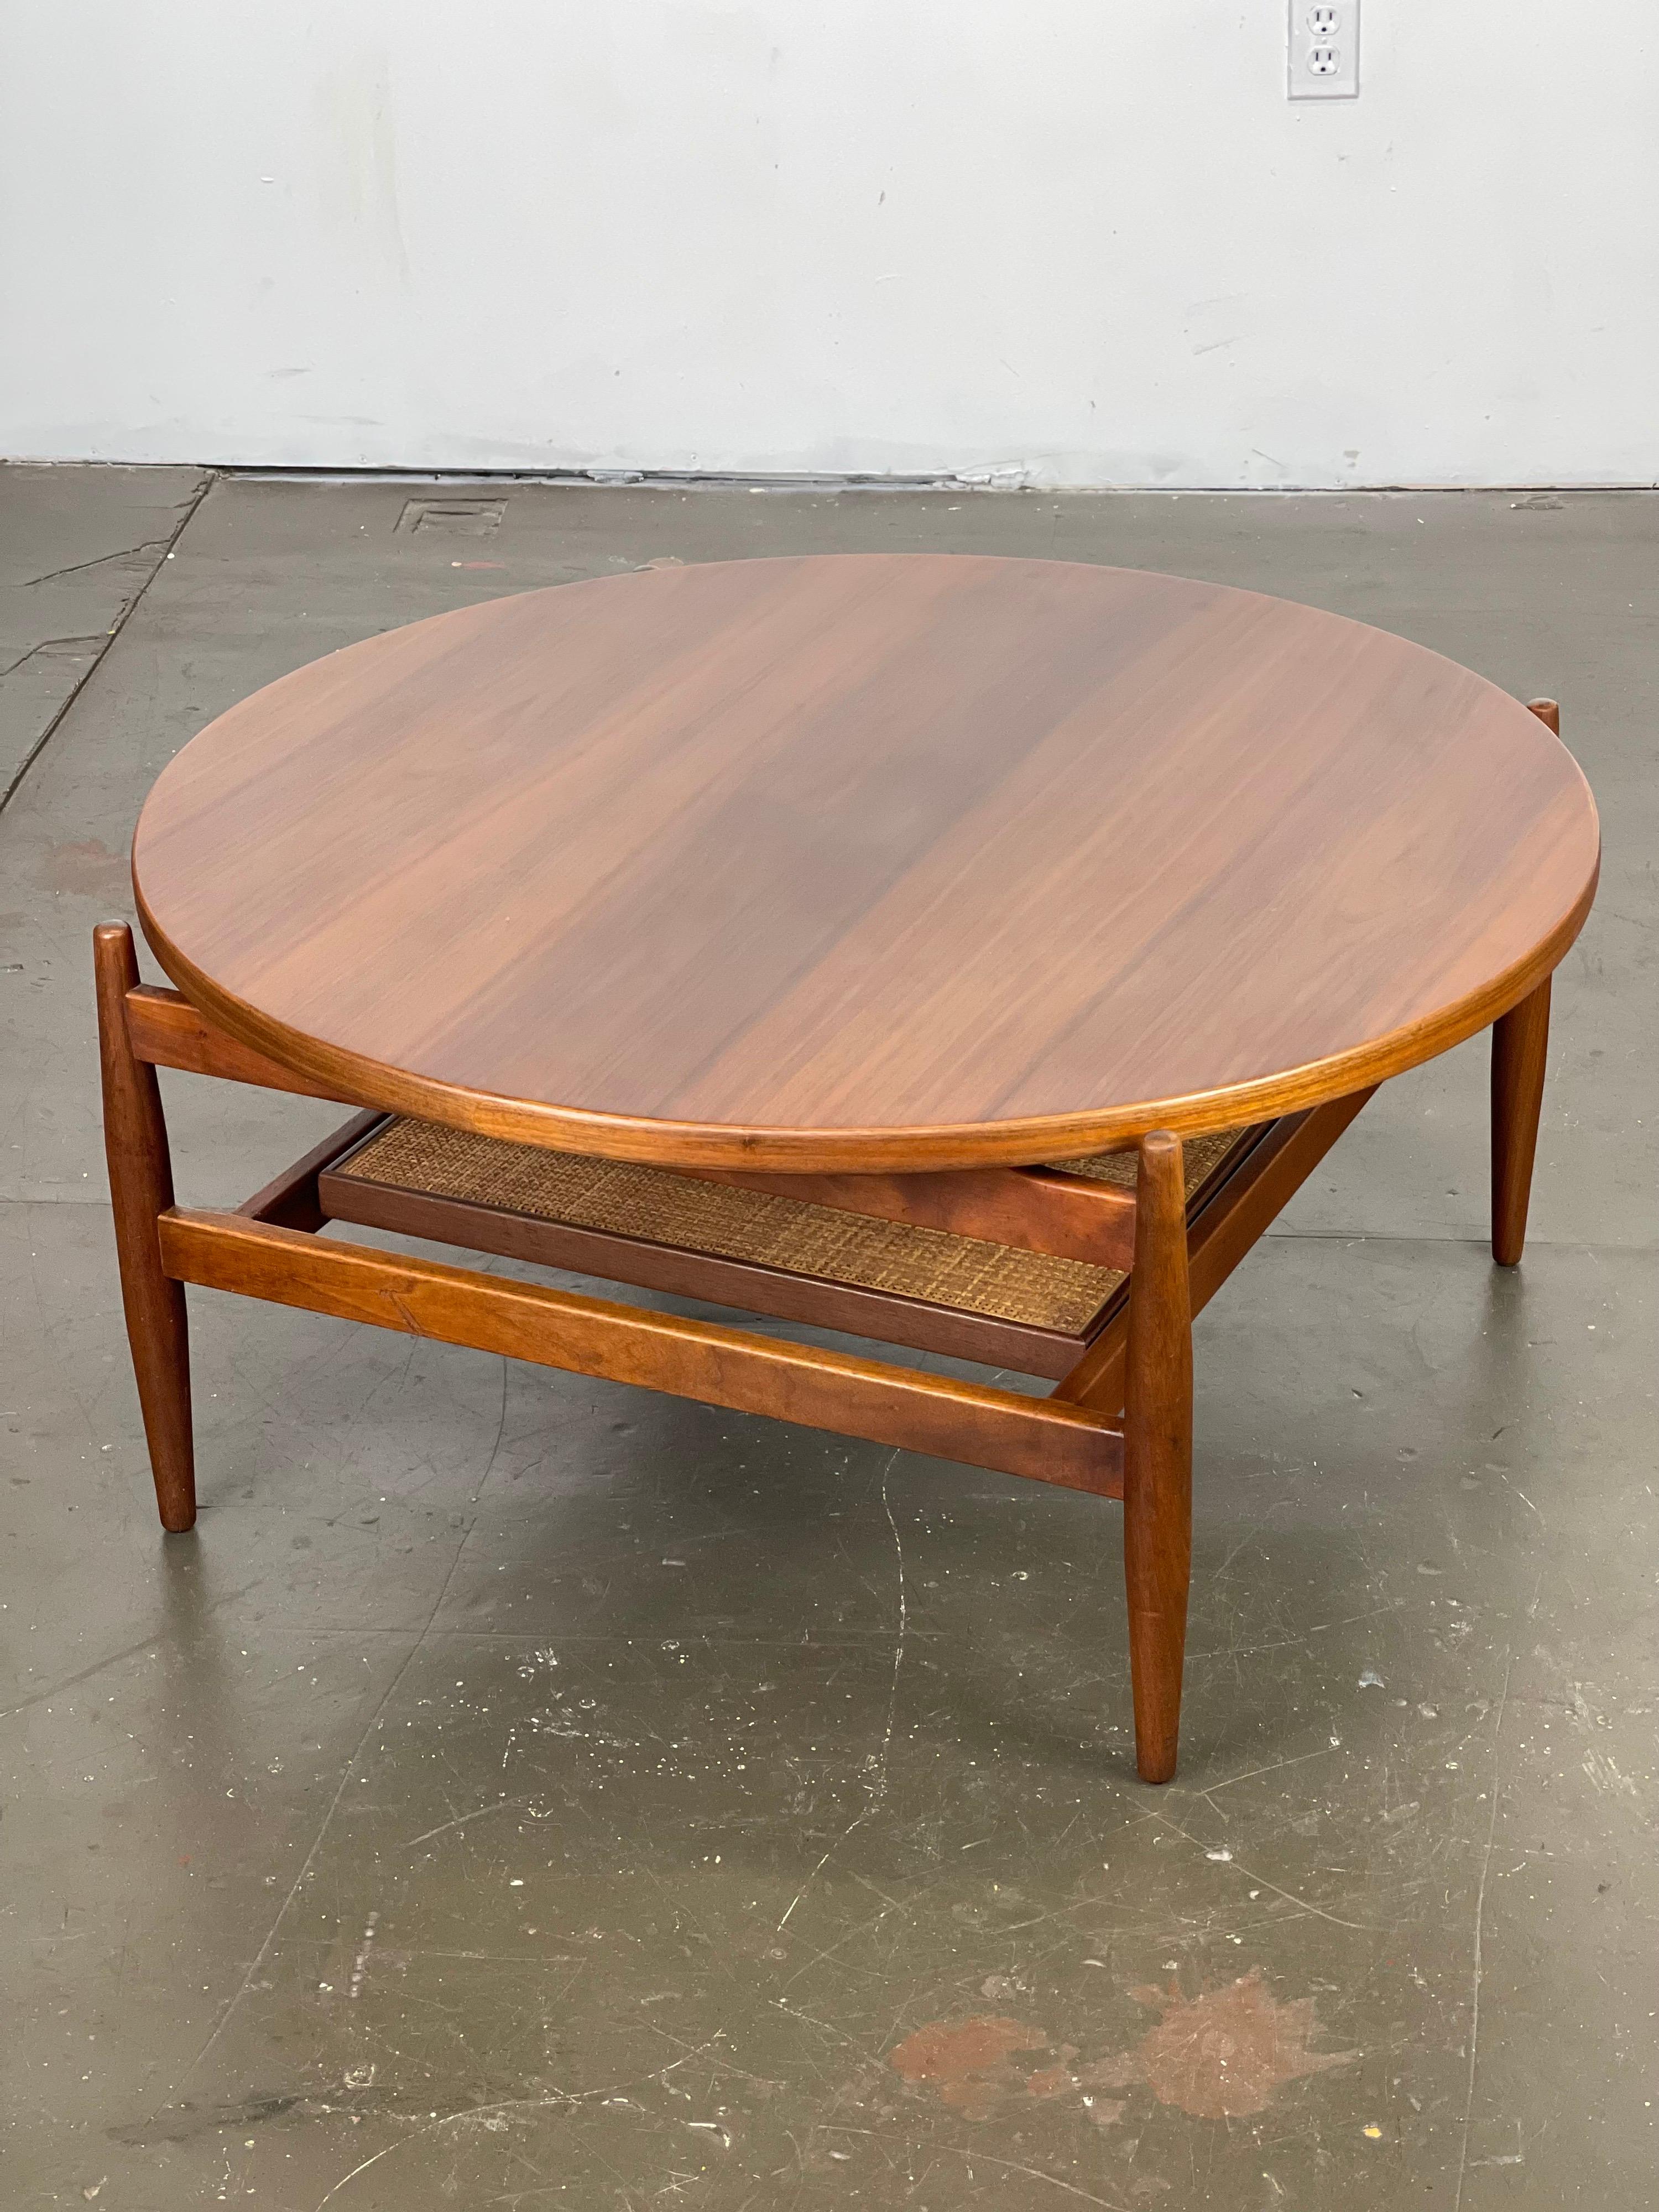 American Mid Century Floating Round Cocktail Table by Jens Risom in Walnut and Cane